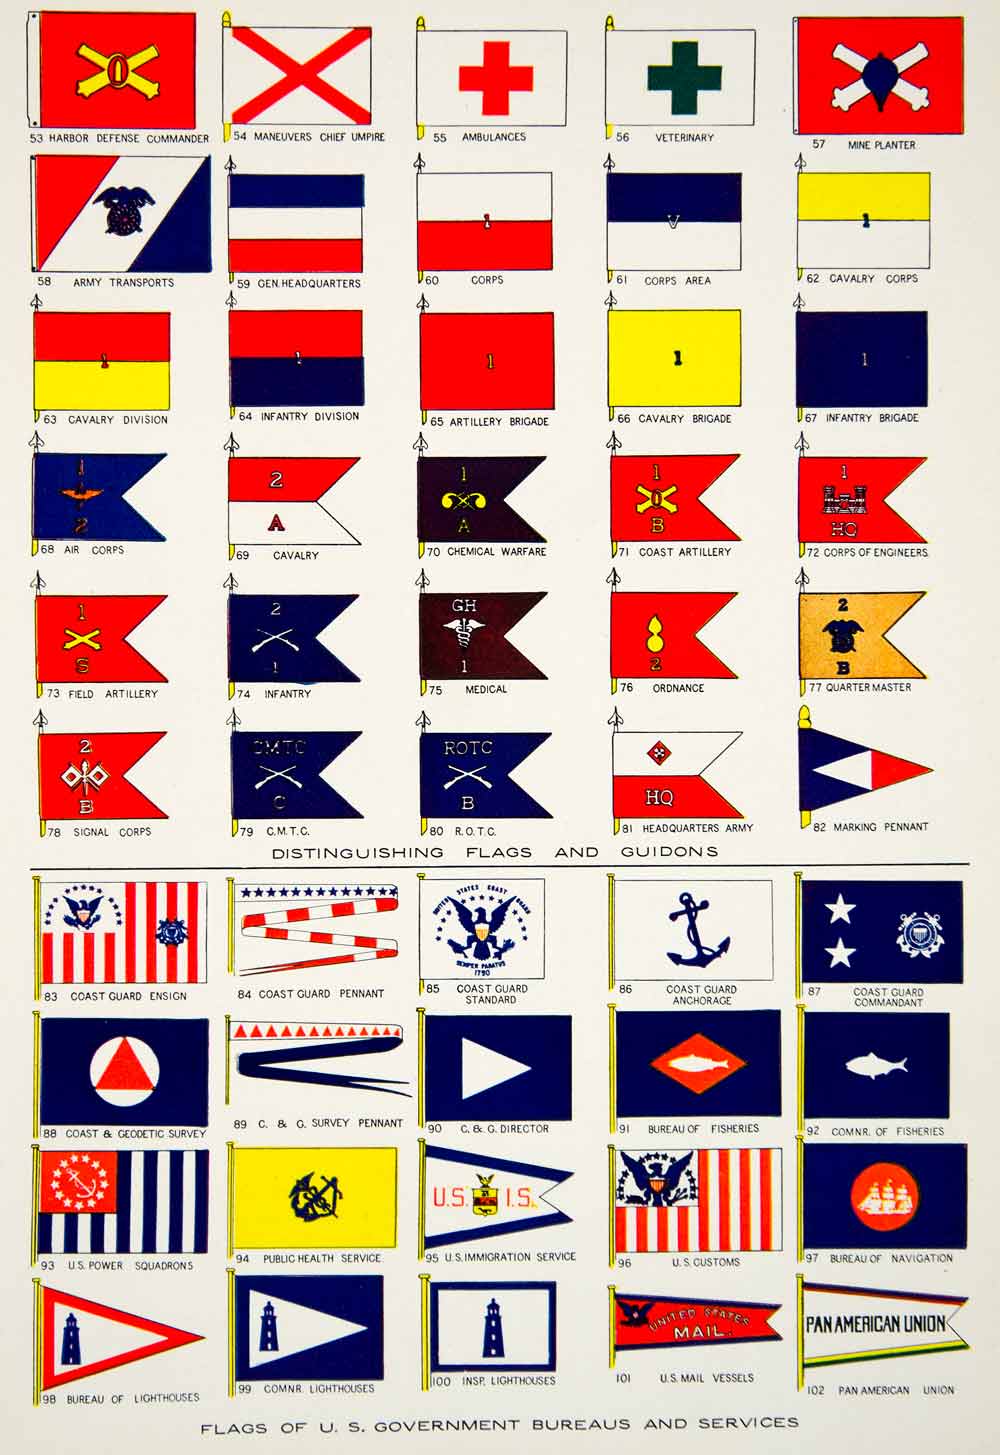 1934 Color Print United States Government Flags Bureaus Services Image NGMA6